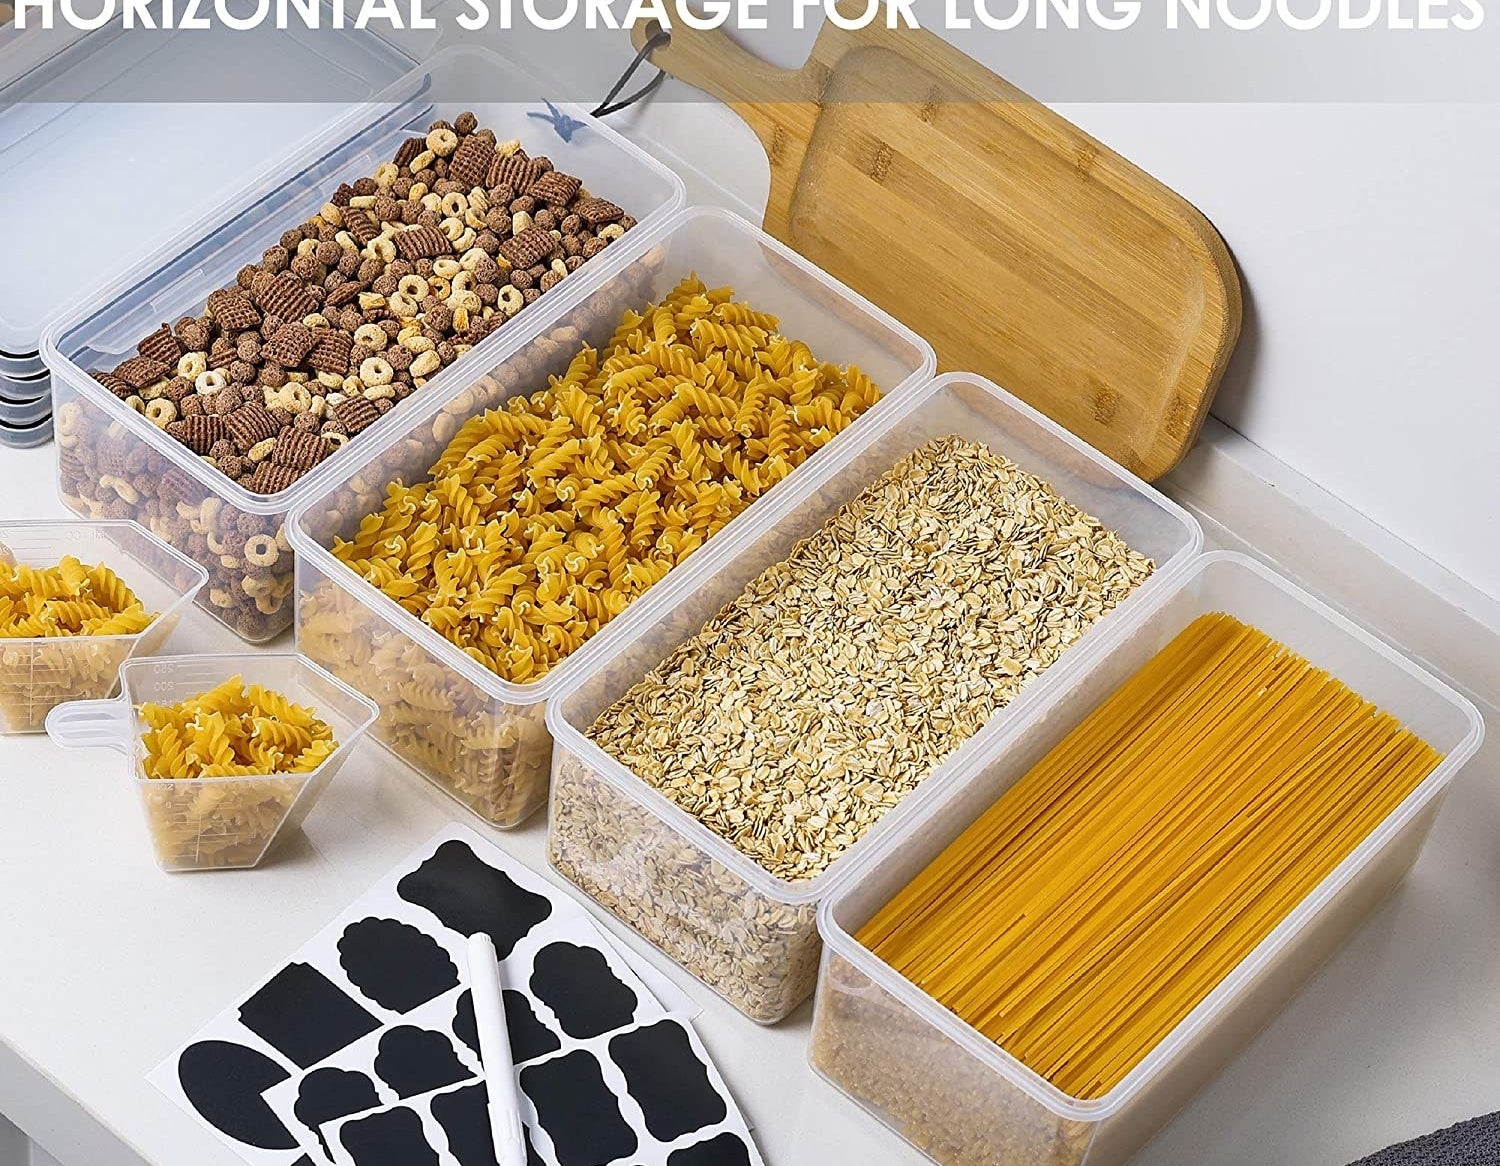 a set of long storage containers filled with pasta noodles, snacks, and oatmeal